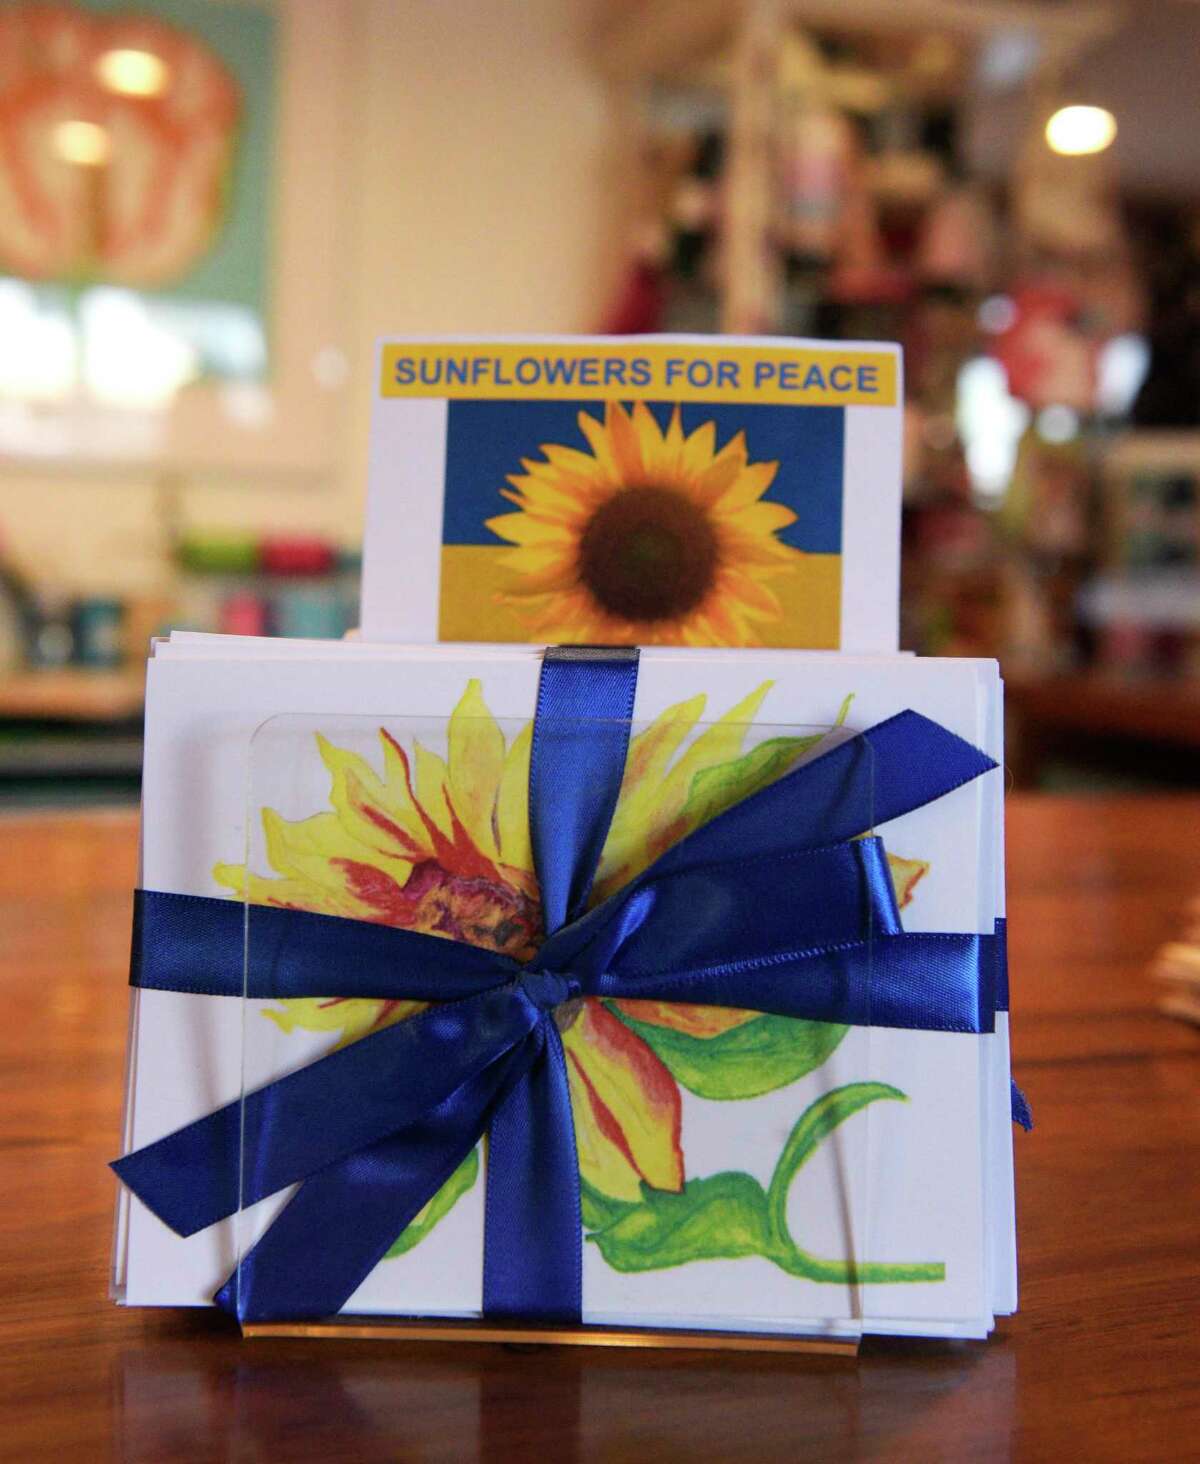 Jill Kerpchar-Rosenfield and Nancy O’Connell have teamed up to benefit the Save the Children’s Ukrainian crisis relief fund through the sale of sunflower pins and notecards. Wednesday, April 13, 2022, Ridgefield, Conn.